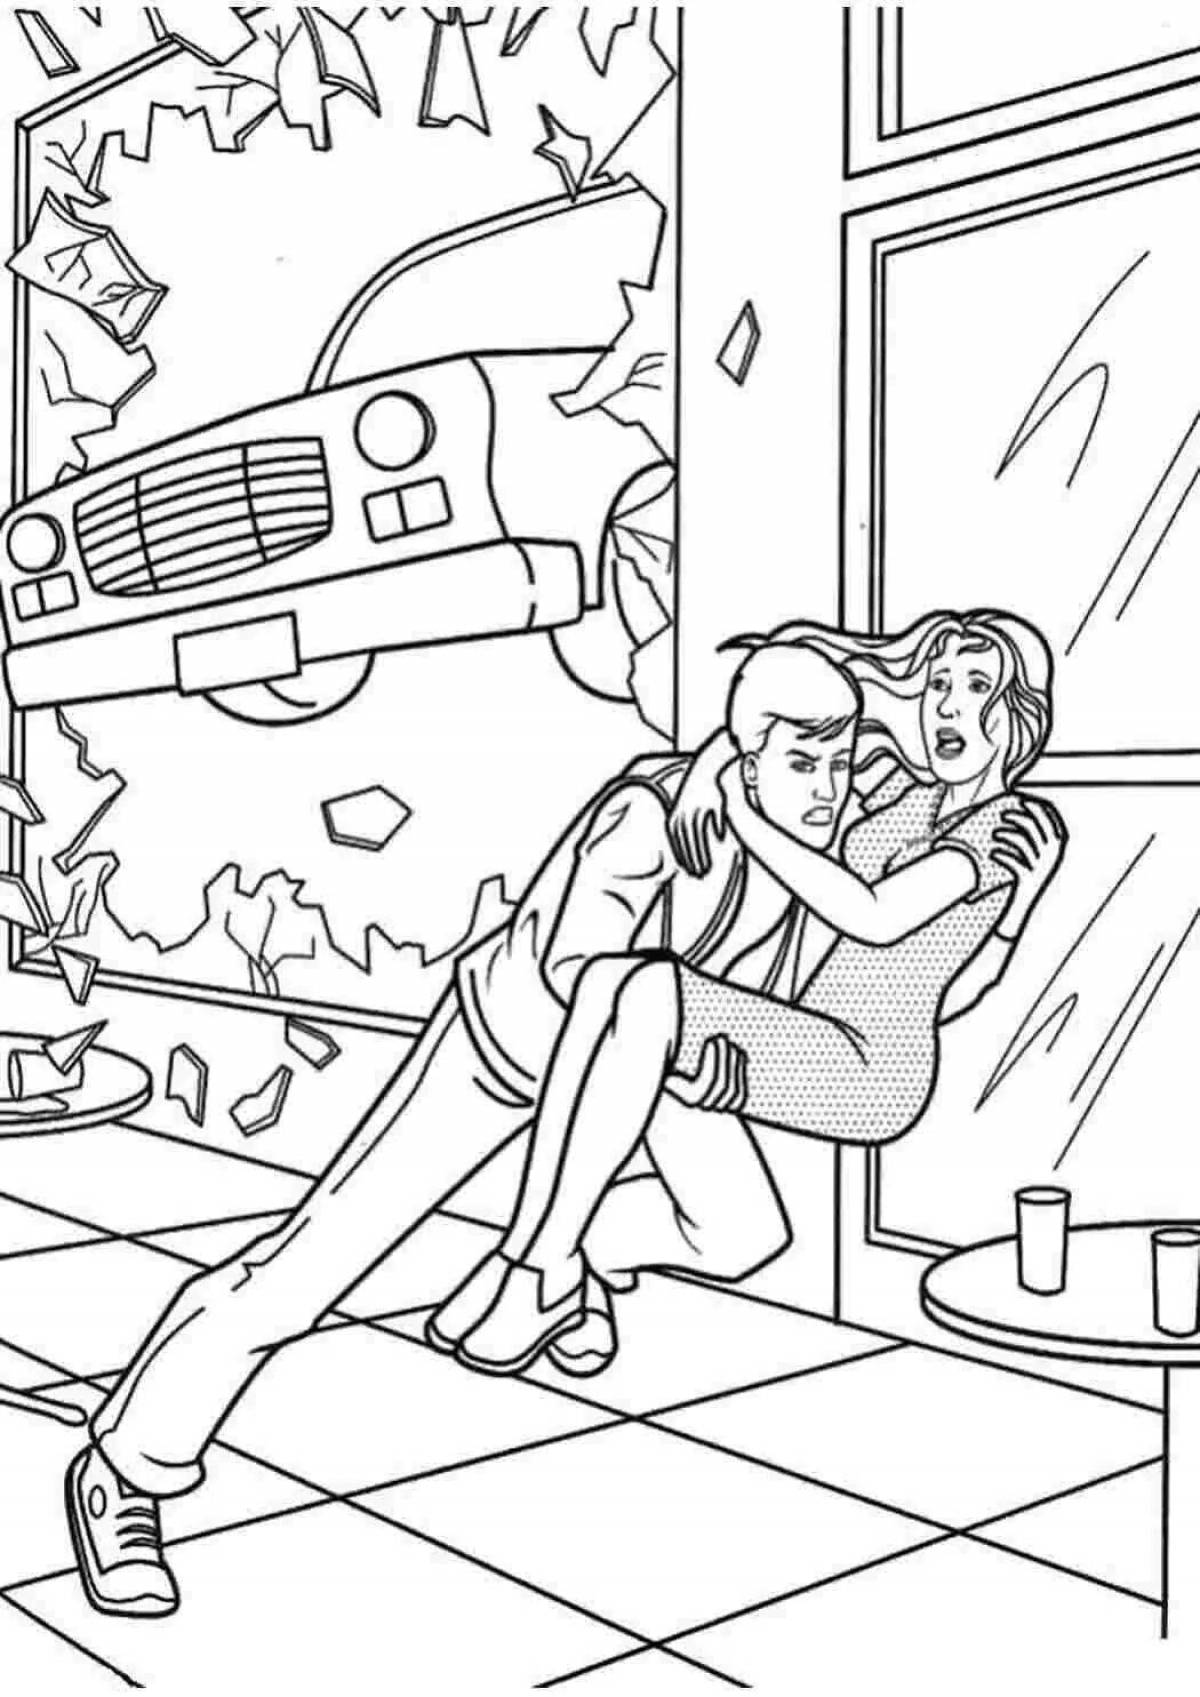 Spider-girl live coloring page